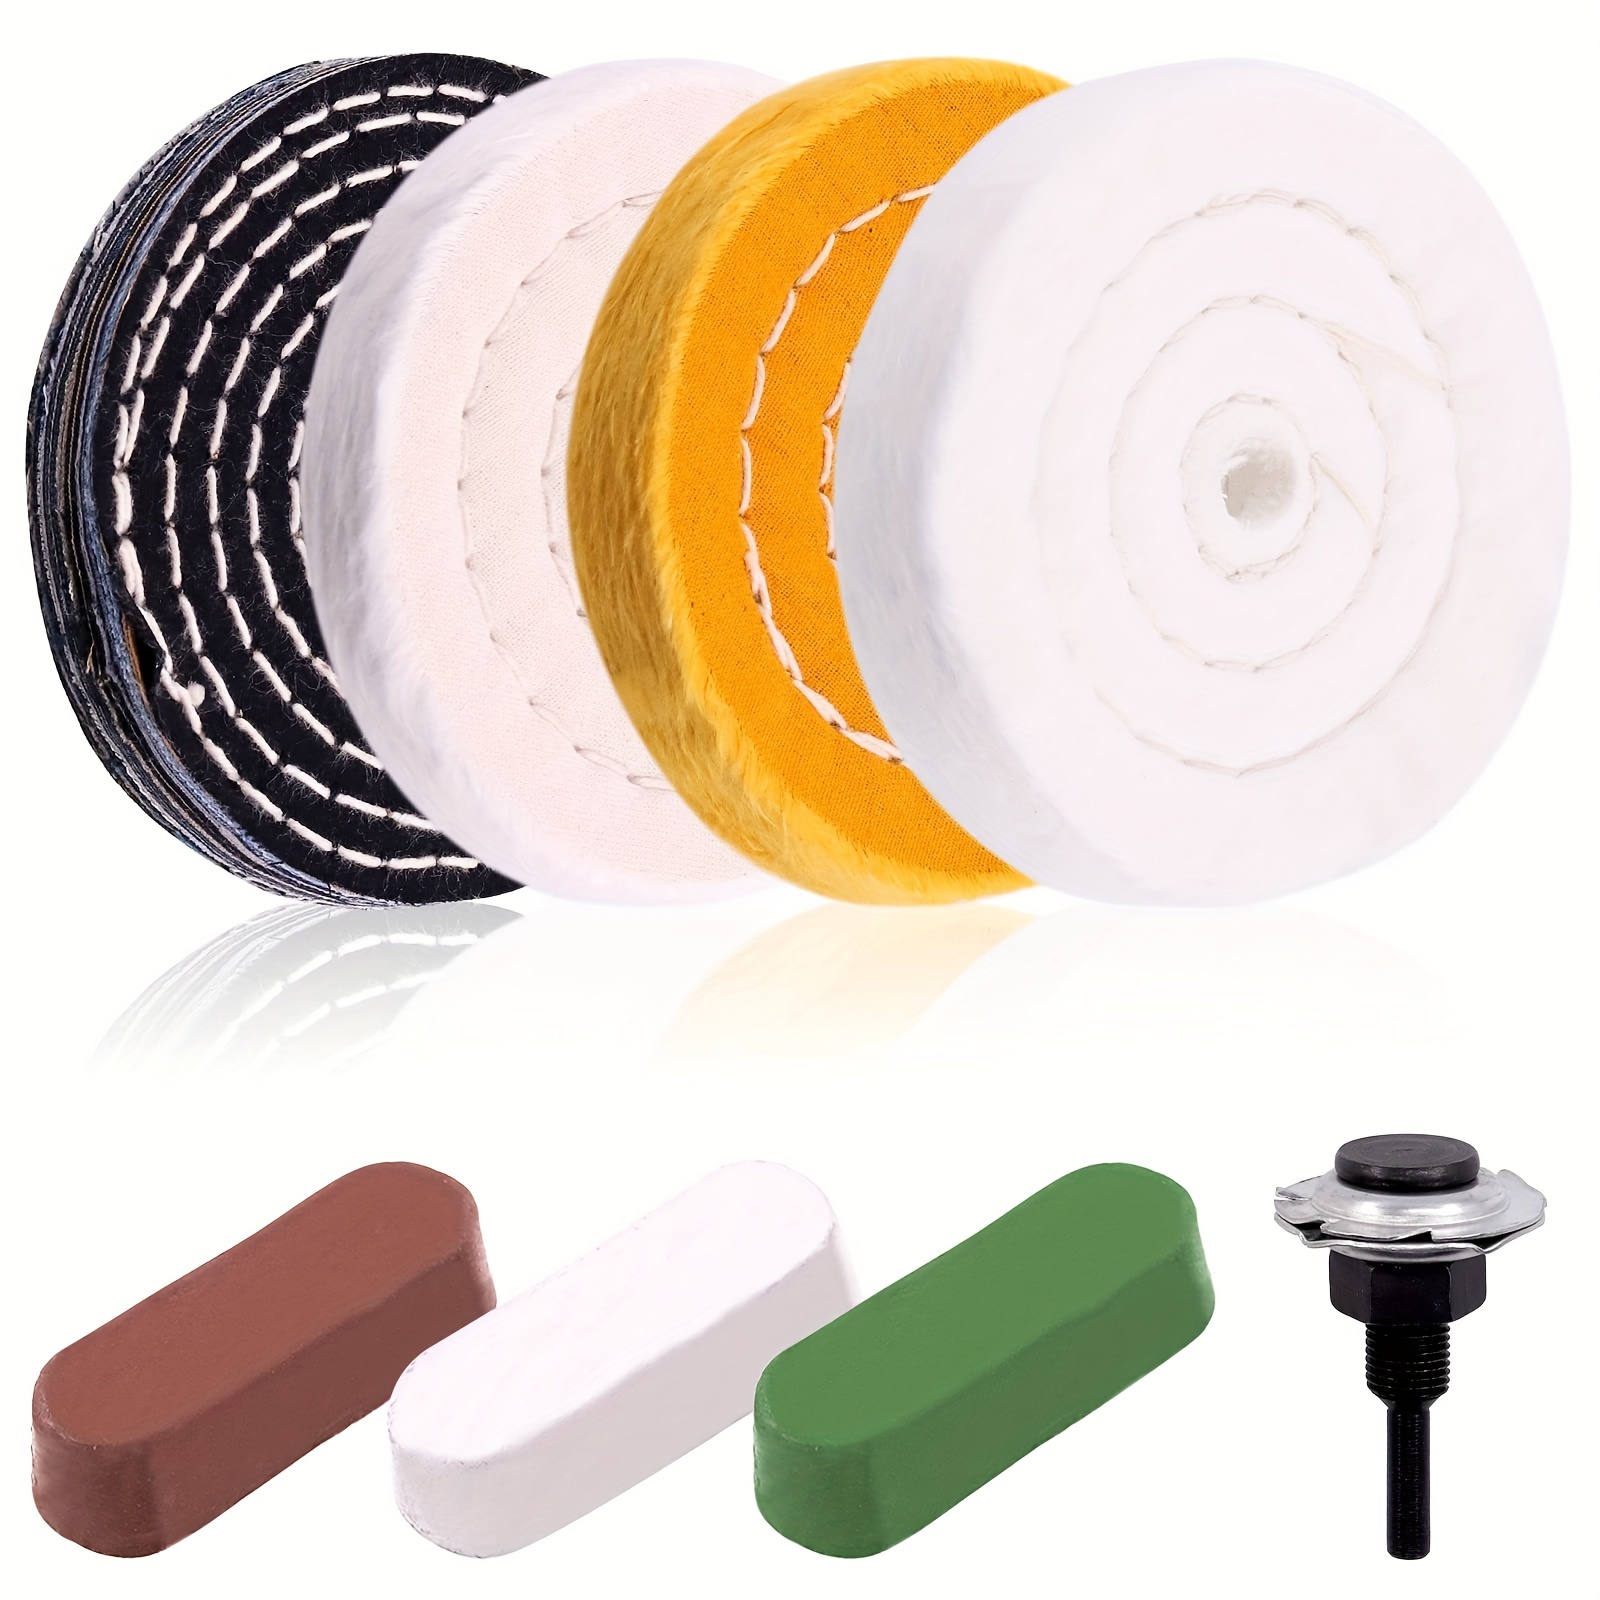 Buffing Polishing Wheel Kit 3 inch,for Bench Buffer/Bench Grinder,Buffing Wheel Hole 3/8 Inch,Drill Arbor Adapter Kit, Size: 70, Other